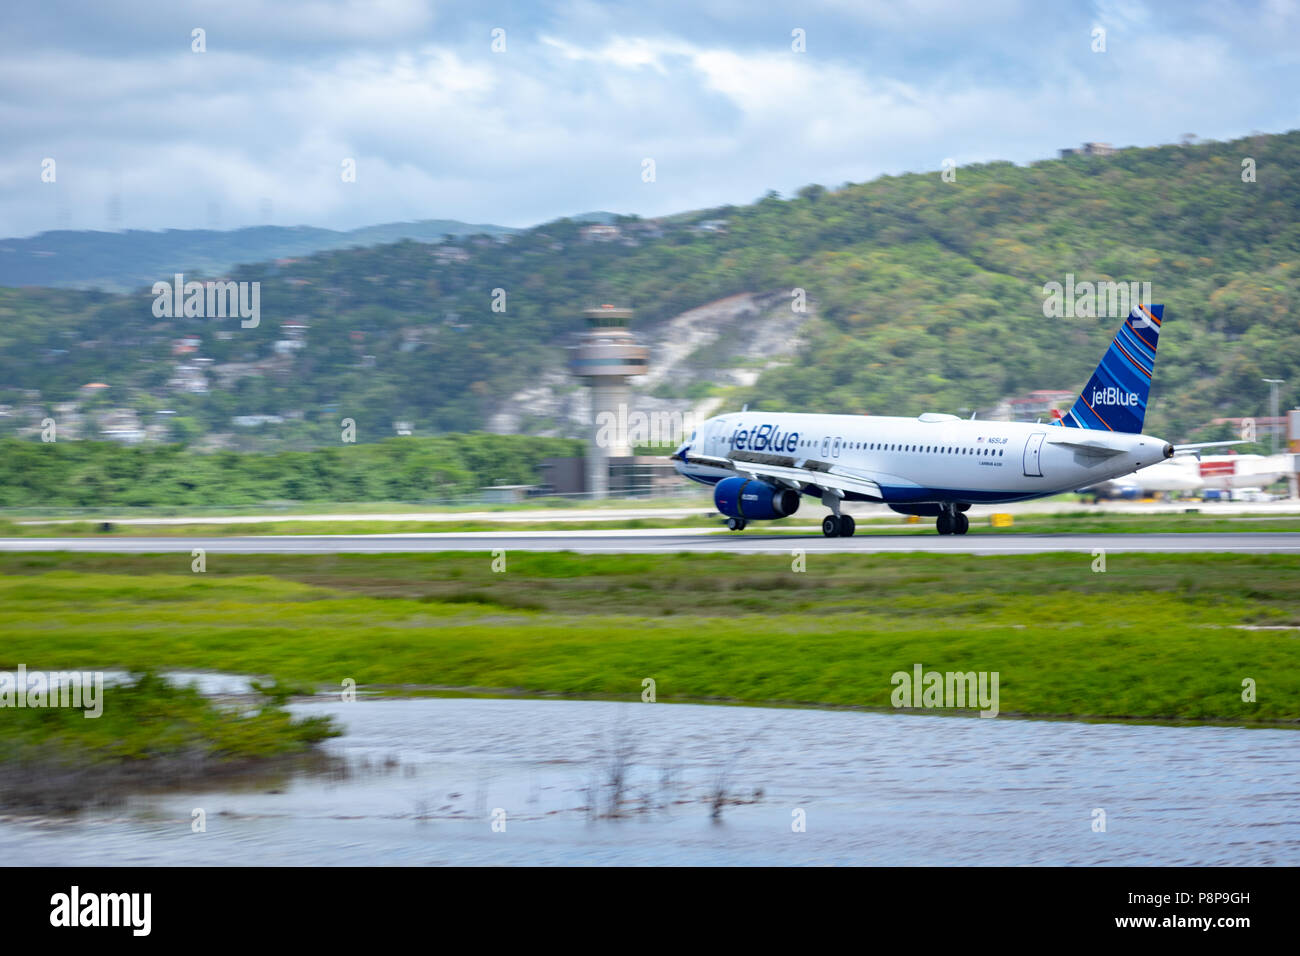 Montego Bay, Jamaica - April 11 2015: JetBlue aircraft on the runway at Sangster International Airport (MBJ) in Montego Bay, Jamaica. Stock Photo